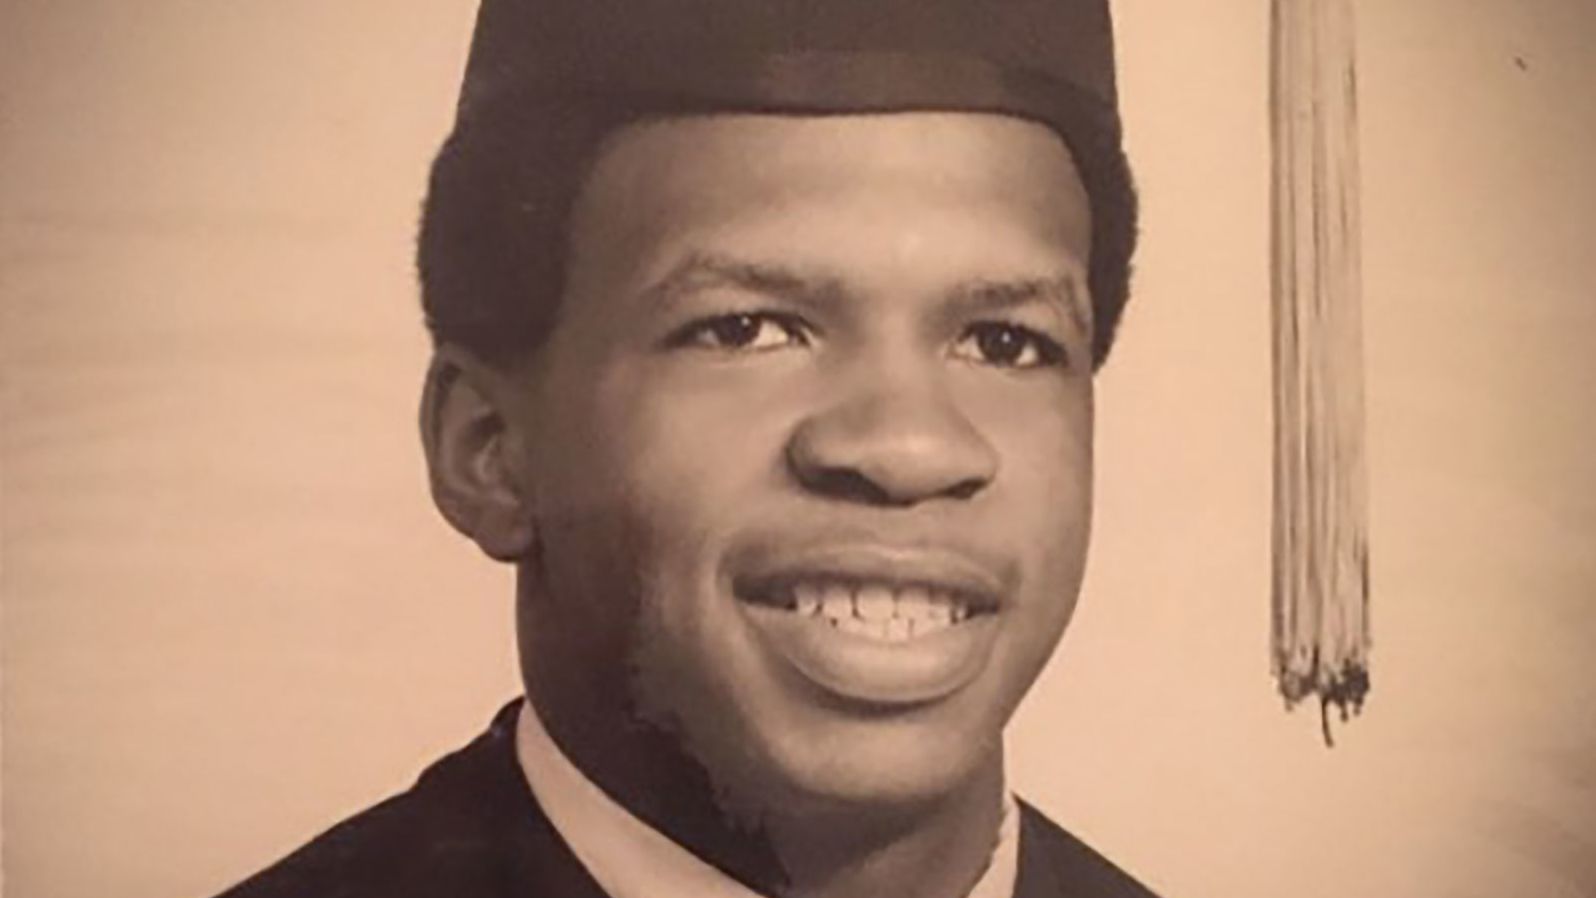 Cummings is seen in a yearbook photo from his senior year of high school. He graduated in 1969. 